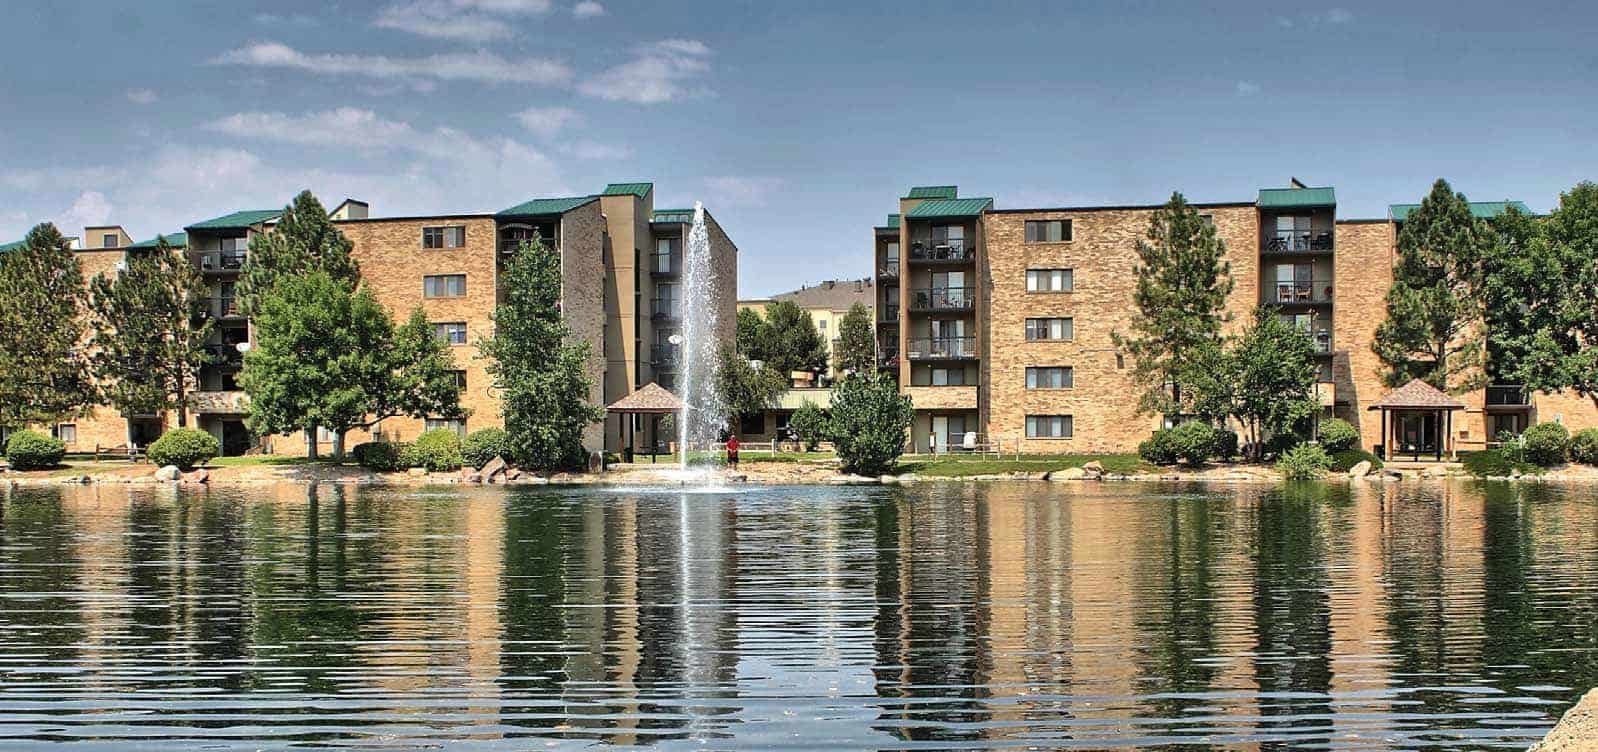 View of the lake and fountain with 5 story apartment buildings in the background.